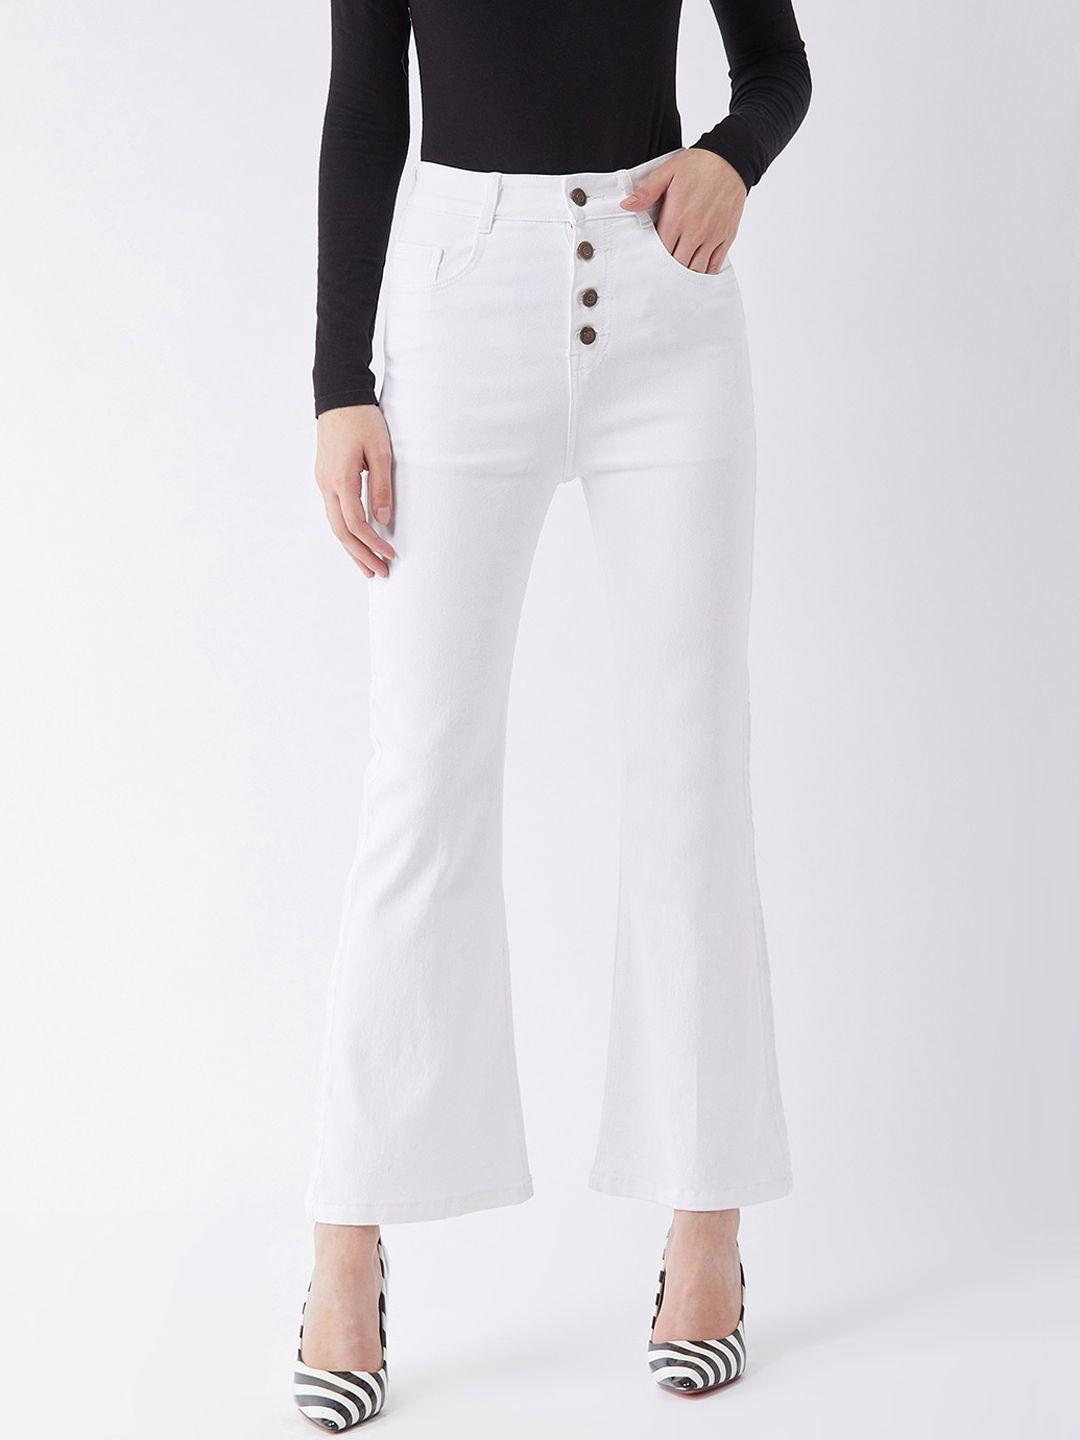 dolce-crudo-women-white-bootcut-high-rise-stretchable-jeans